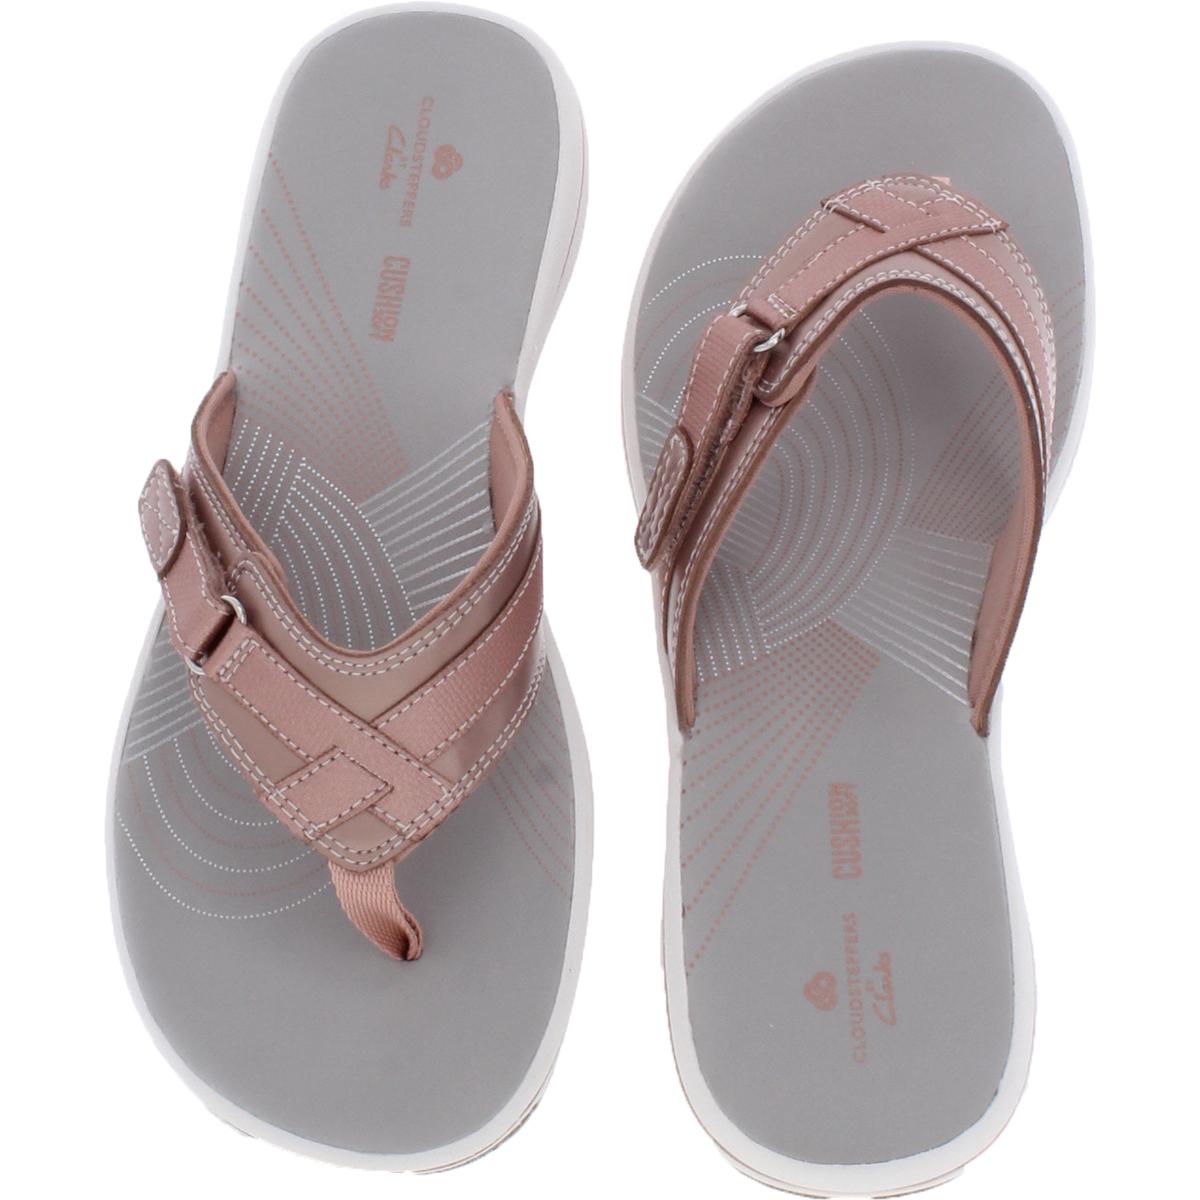 Cloudsteppers by Clarks Breeze Sea Womens Flip-Flop Thong Thong Sandals